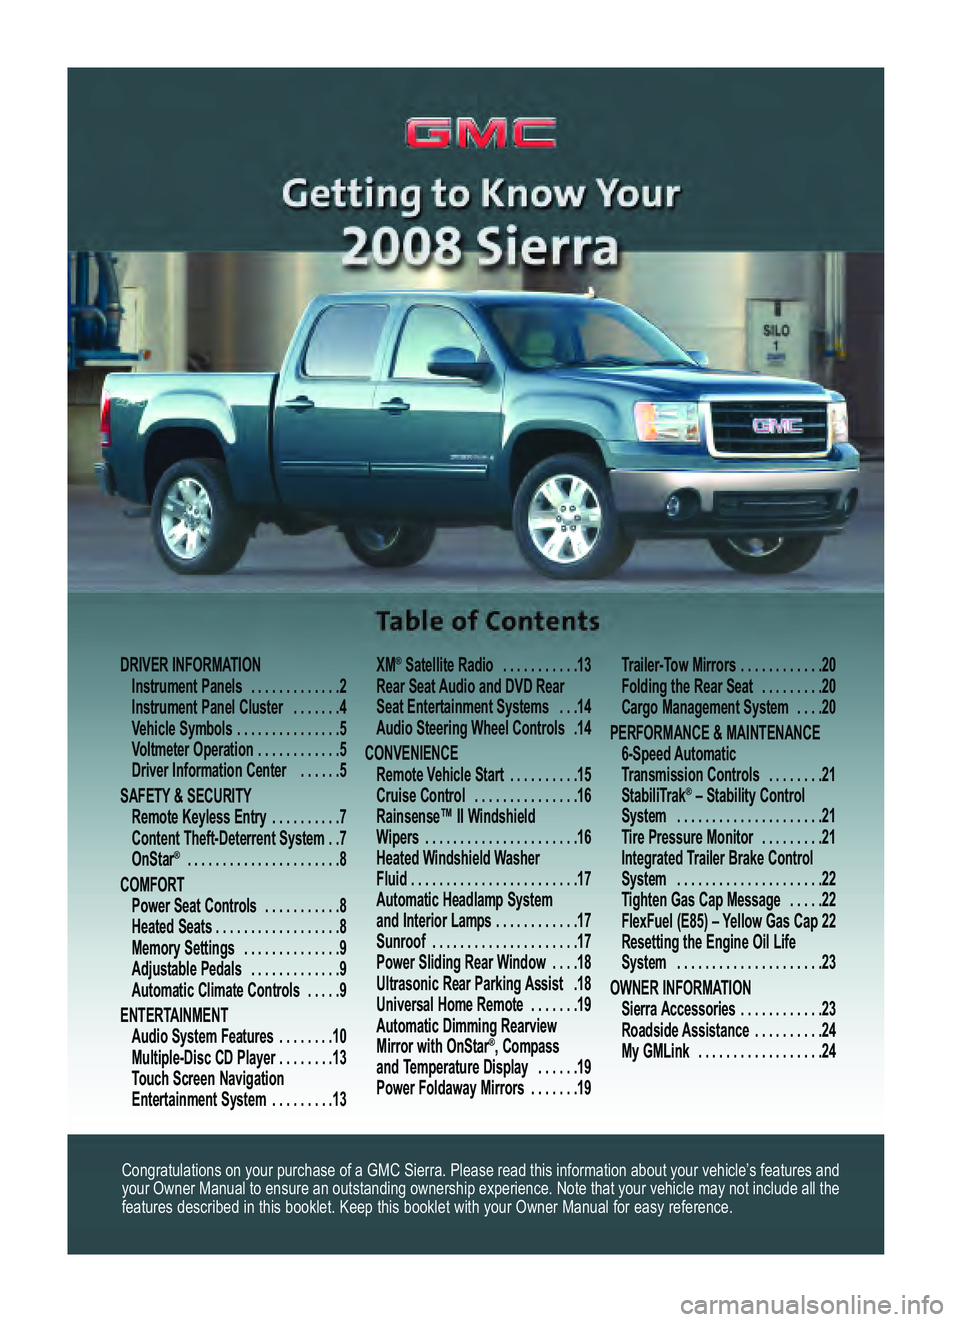 GMC SIERRA 2008  Get To Know Guide Congratulations on your purchase of a GMC Sierra. Please read this information about your vehicle’s features and
your Owner Manual to ensure an outstanding ownership experience. Note that your vehic